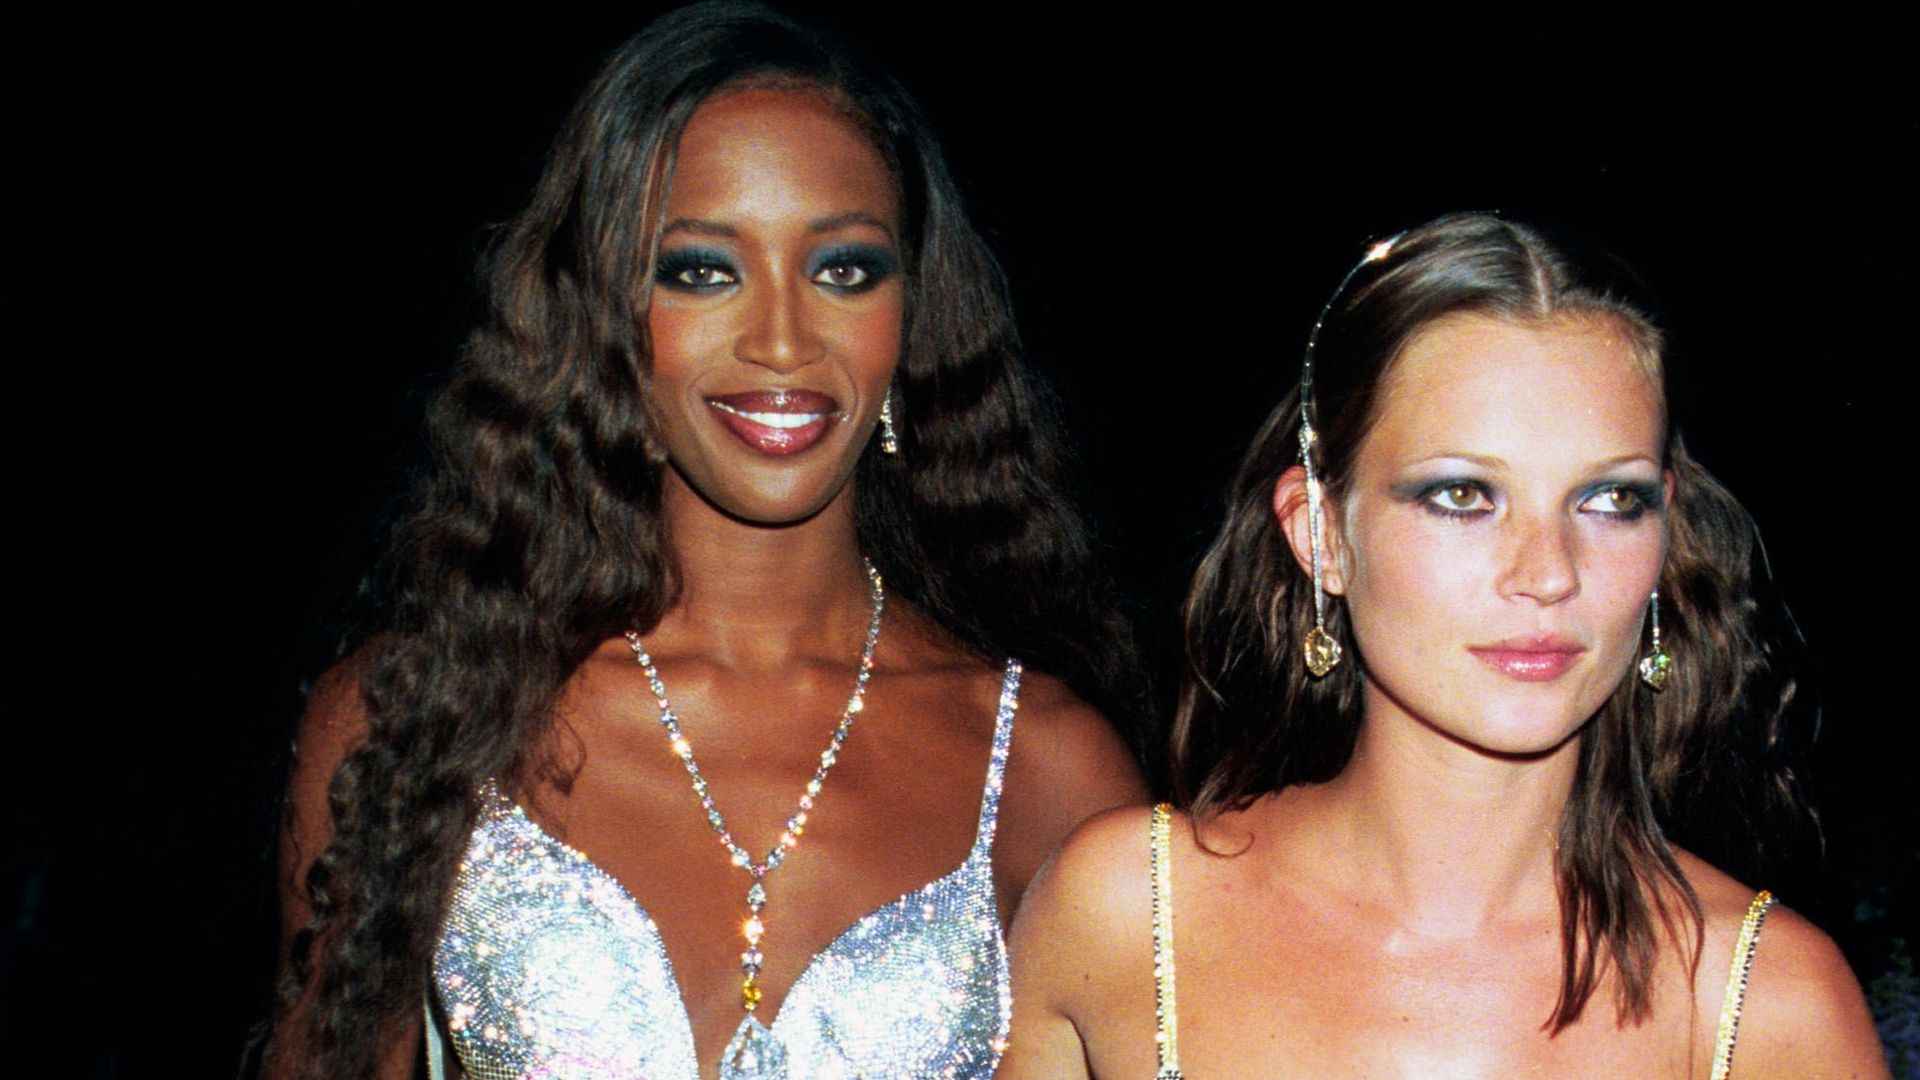 Models Naomi Campbell and Kate Moss wearing silver dresses